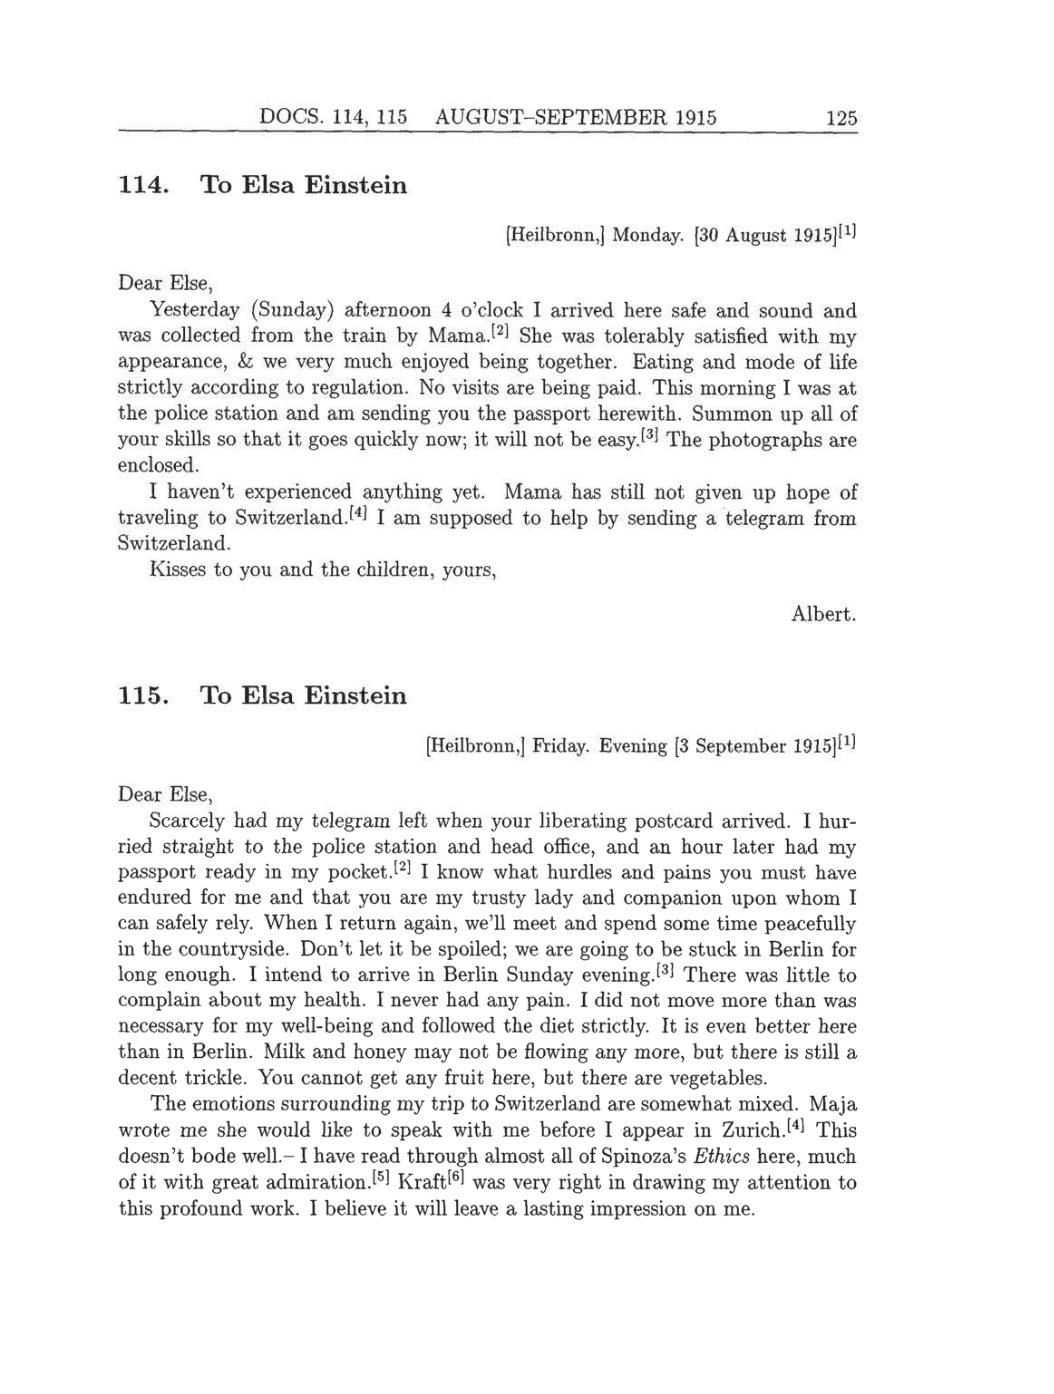 Volume 8: The Berlin Years: Correspondence, 1914-1918 (English translation supplement) page 125